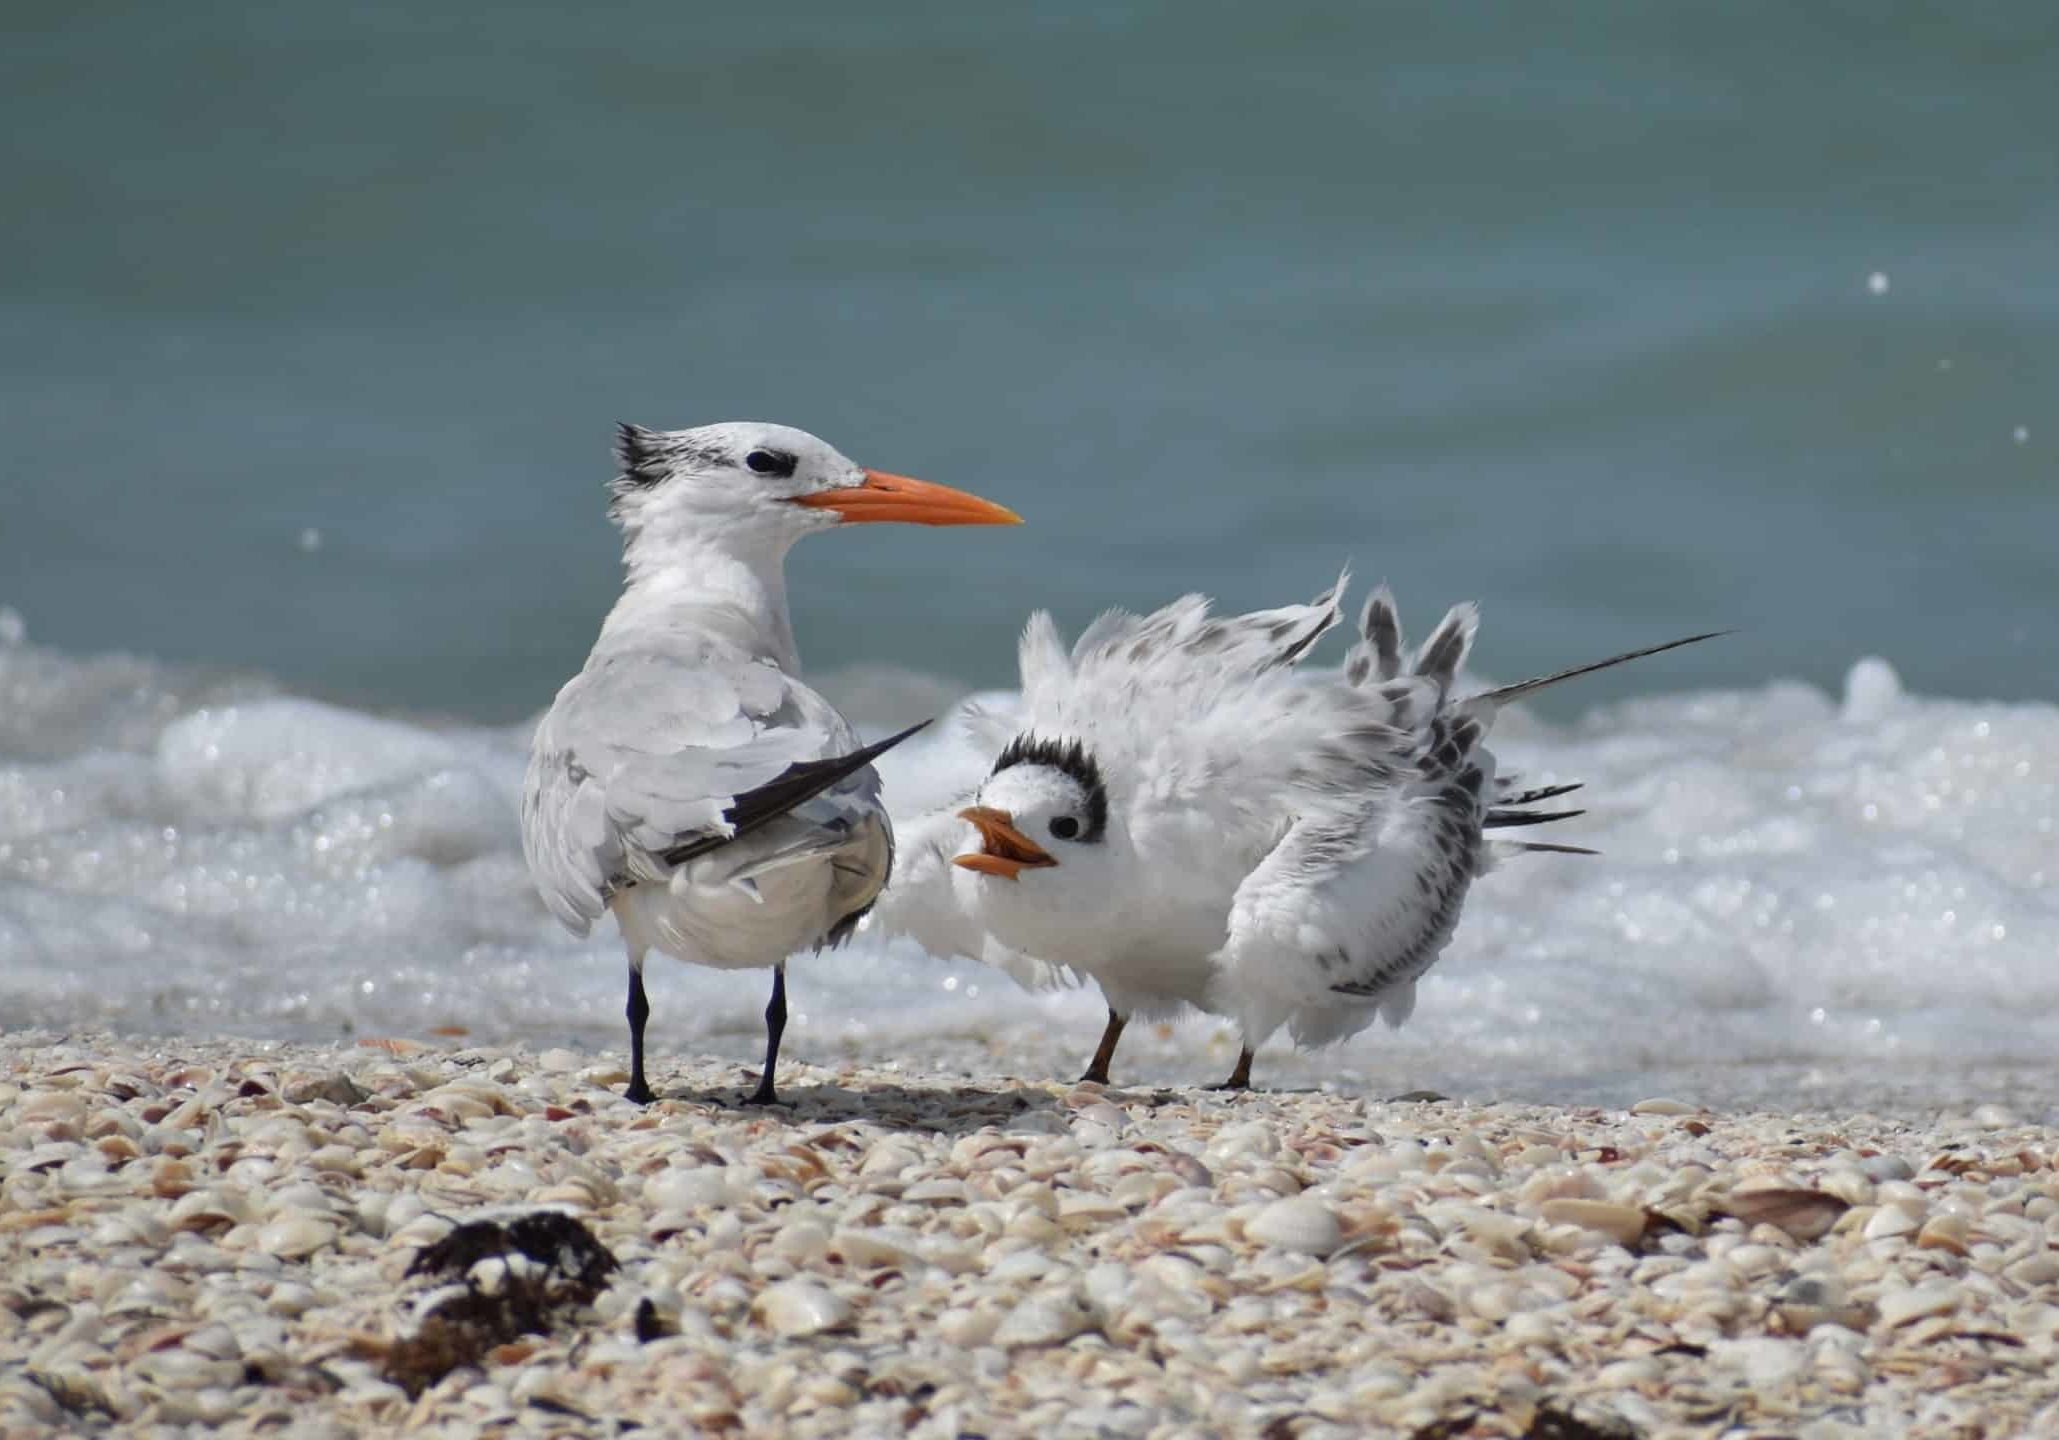 Fledgling royal terns often beg for food from their parents